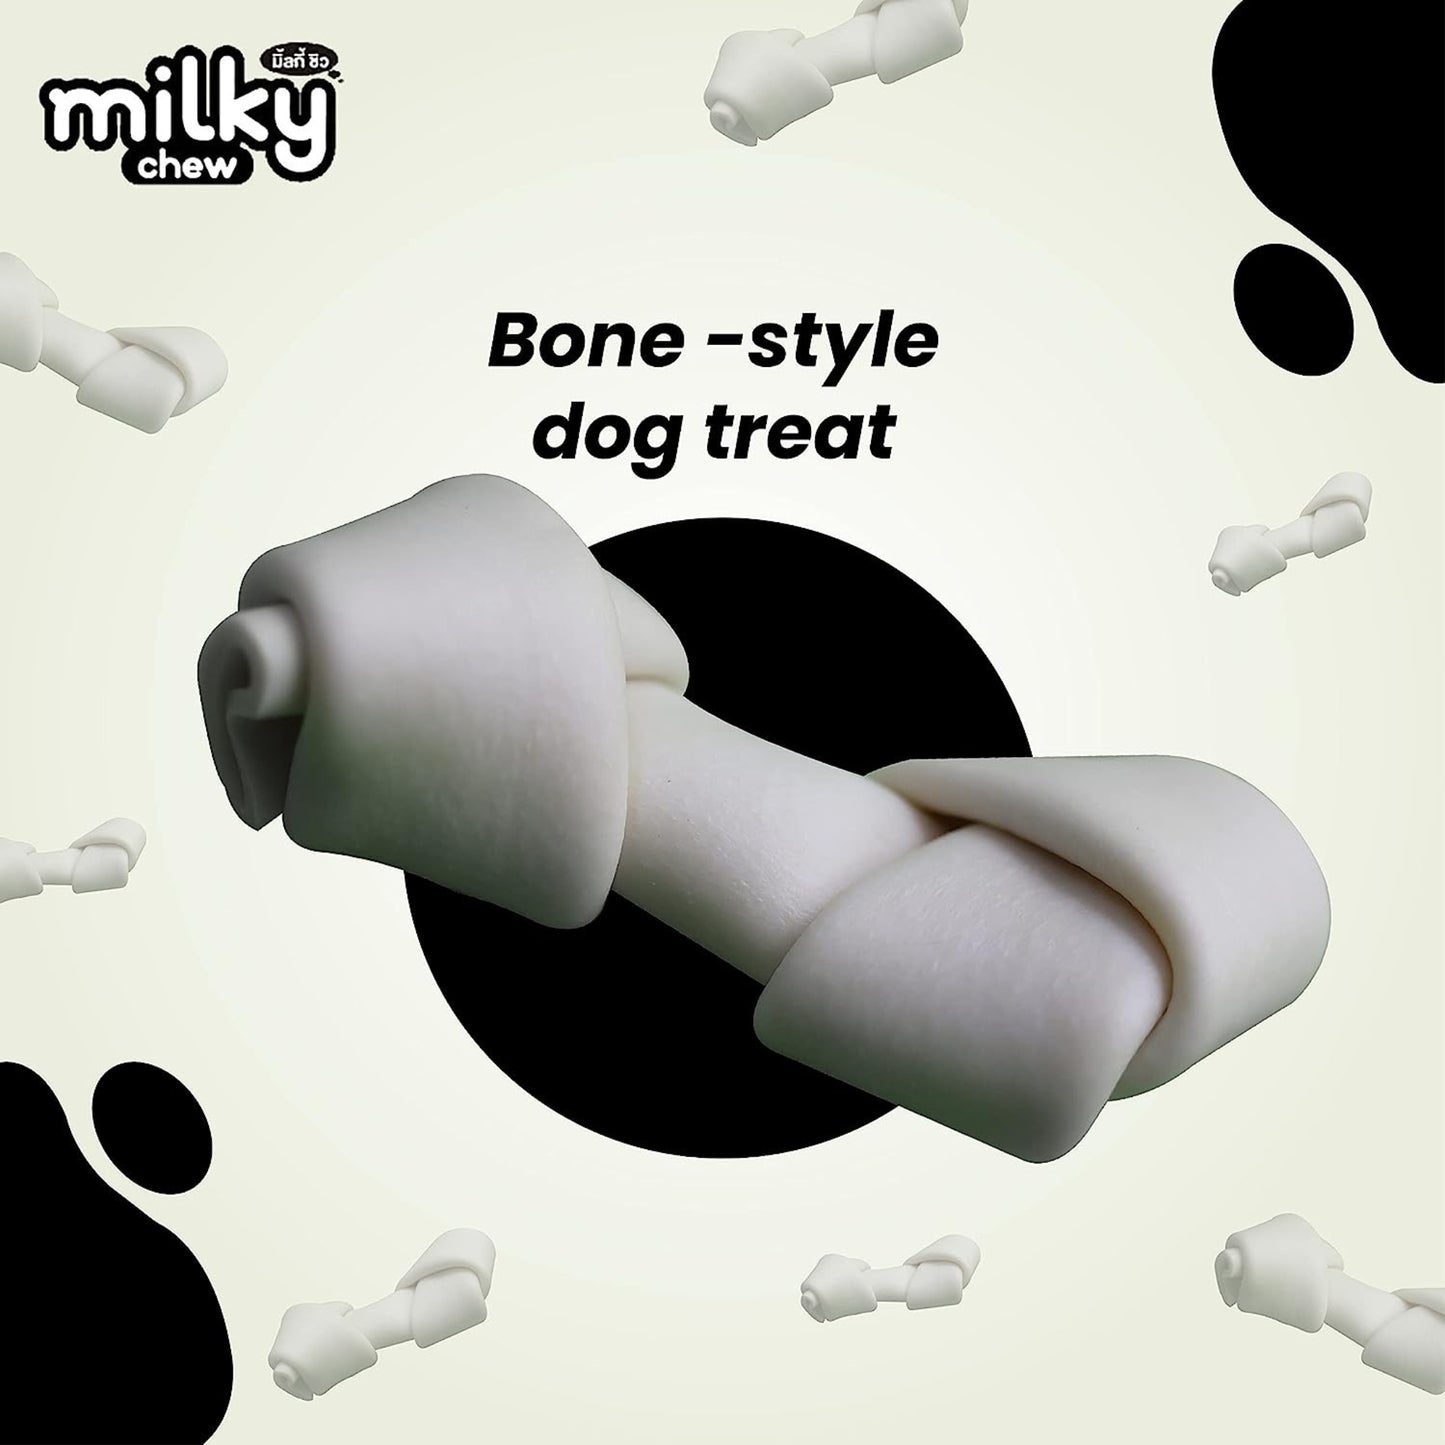 Dogaholic Milky Chew Knotted Bone 15in1 Dog Treat, Pack of 2